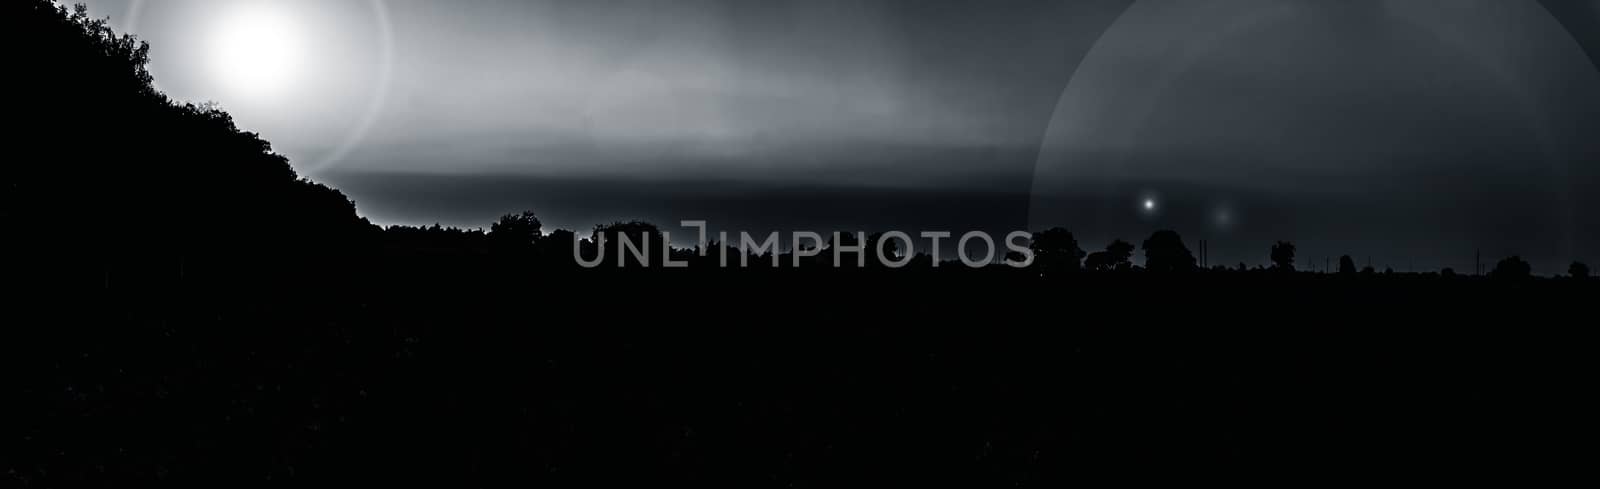 Panorama shot of sunset or sunrise through clouds and mountains and trees in the deep forest. by mirzamlk